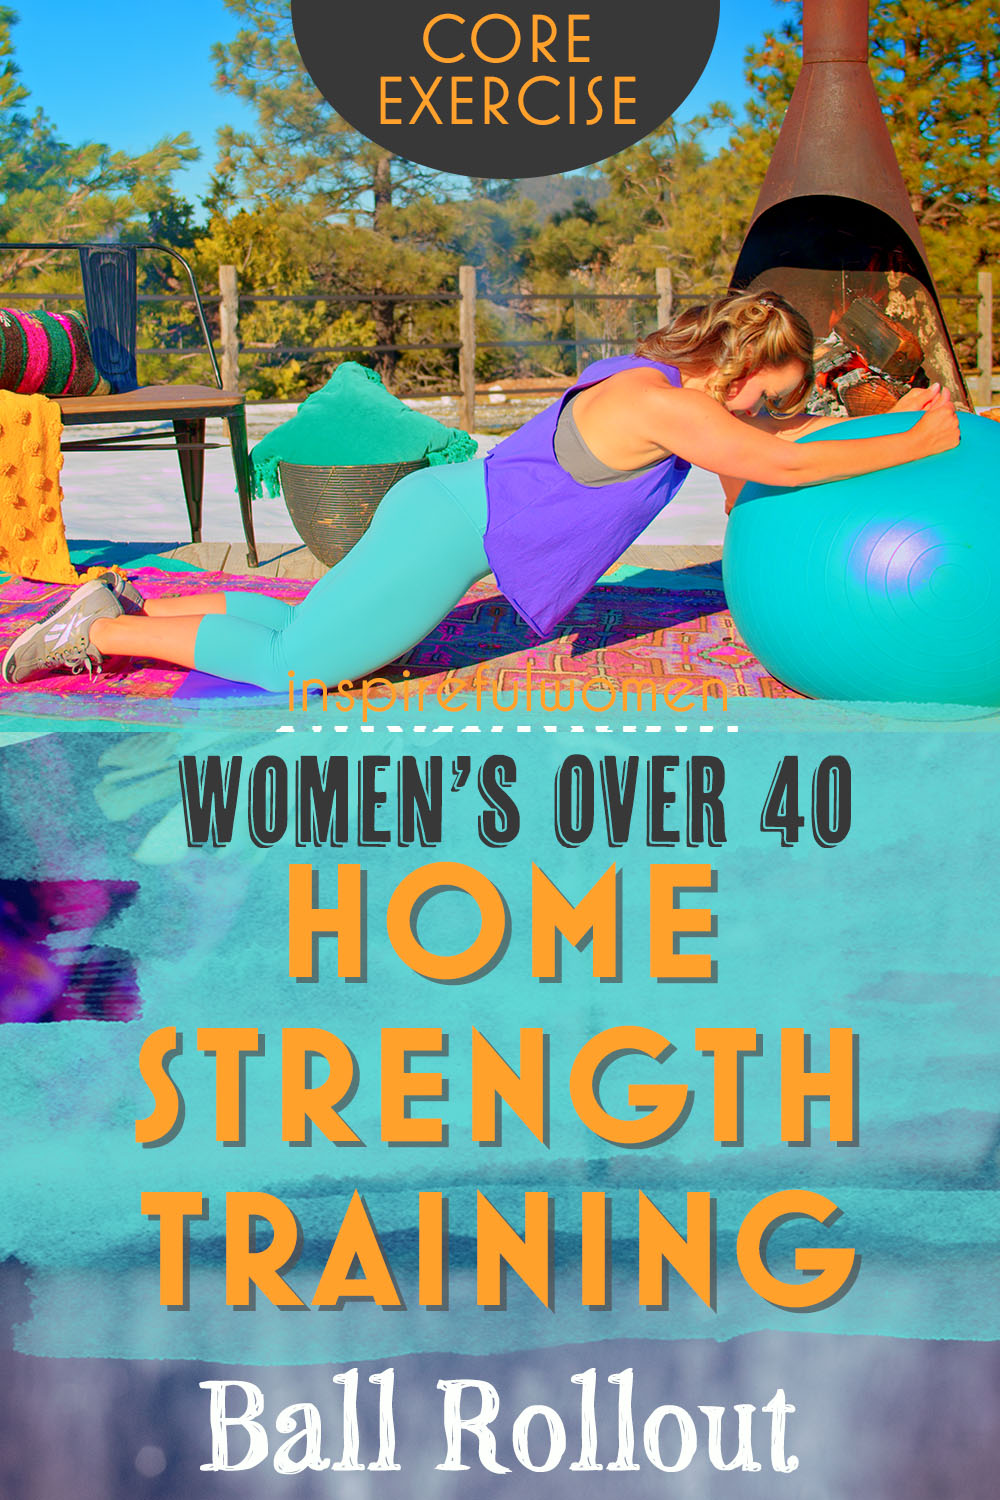 stability-ball-rollouts-neutral-spine-core-rectus-abdominus-exercise-home-resistance-training-women-over-40